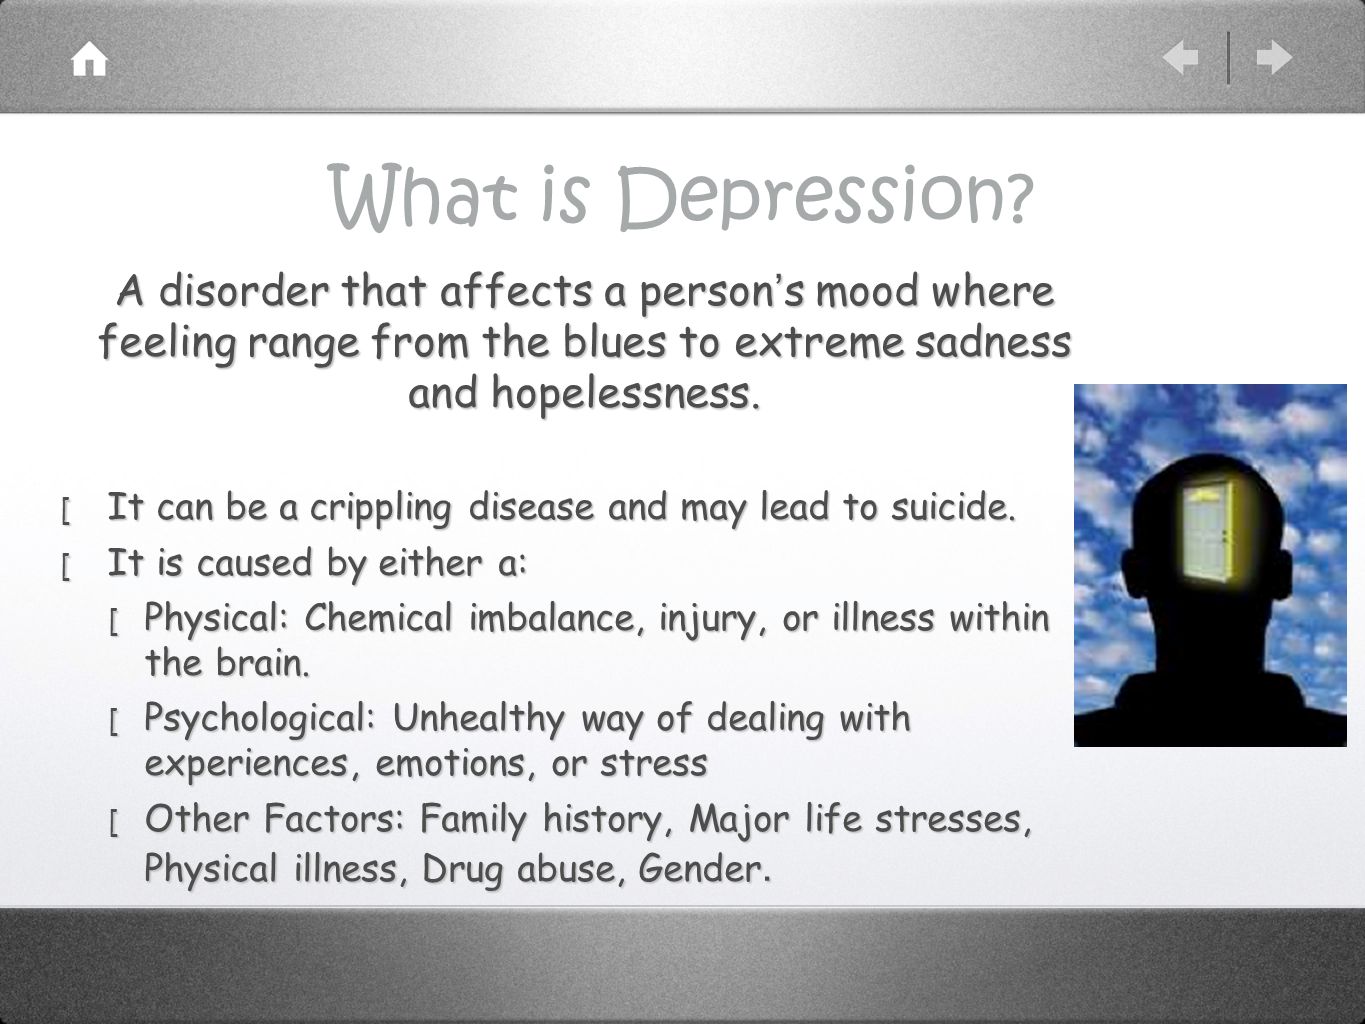 What is Depression.